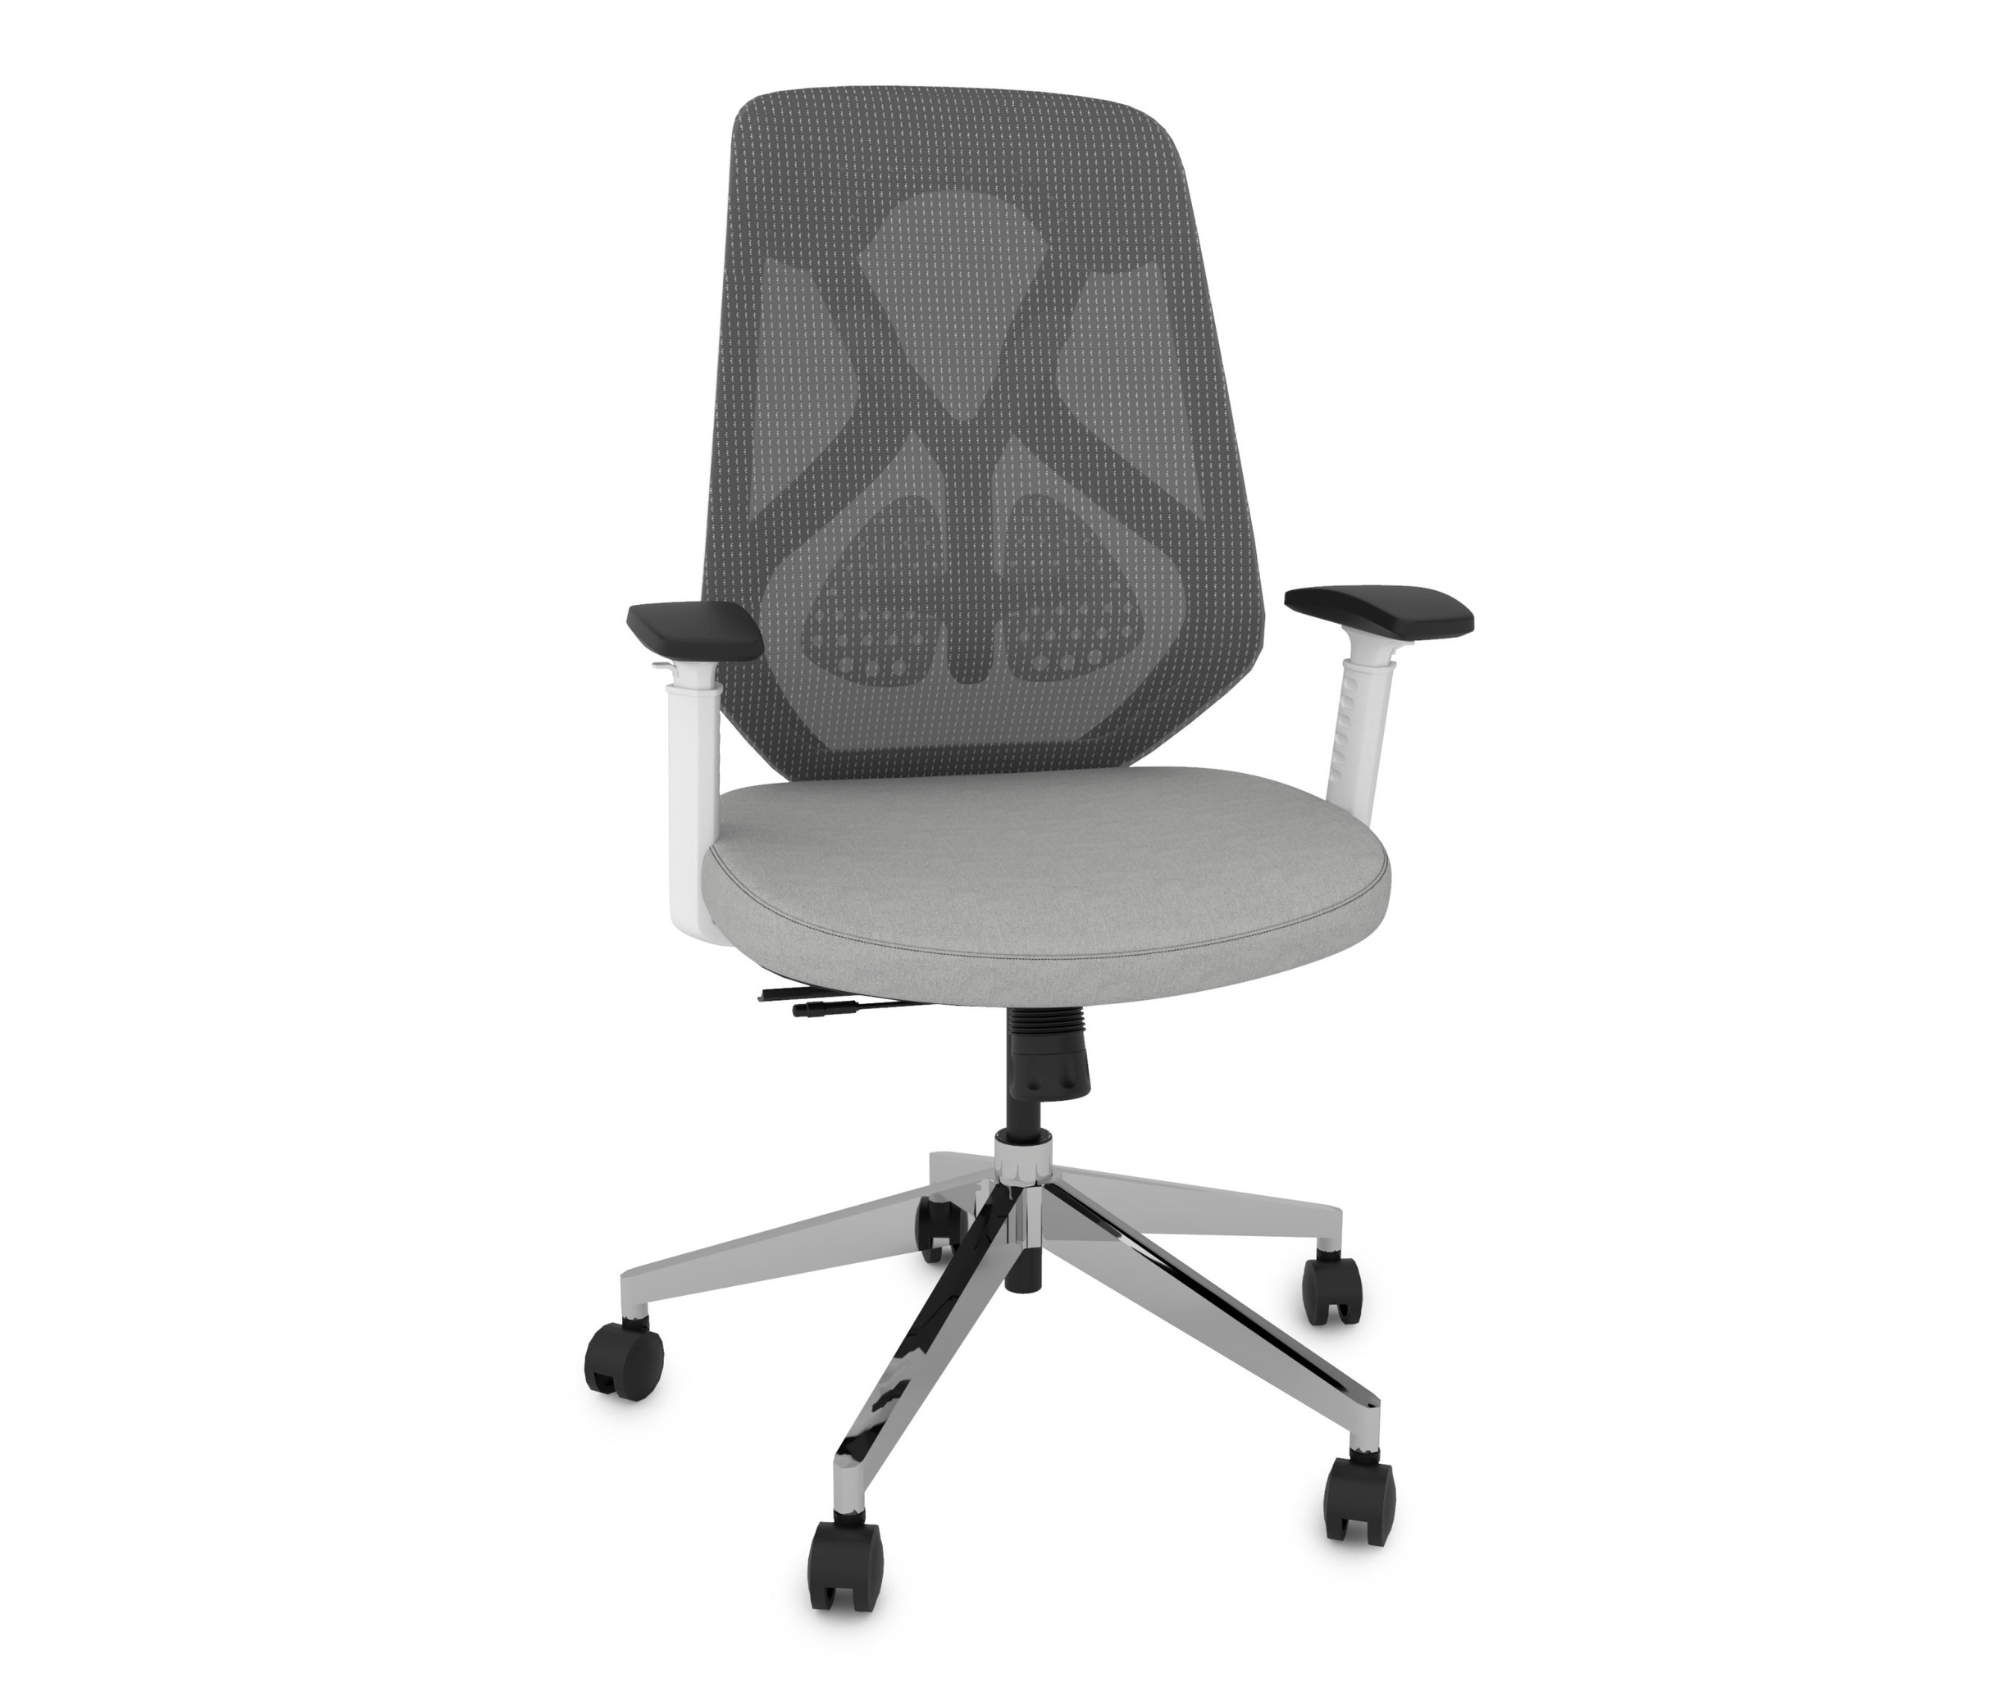 Ergonomic Plus Chair | Posture-Correcting Office Chair Porvata Office Chairs Stone